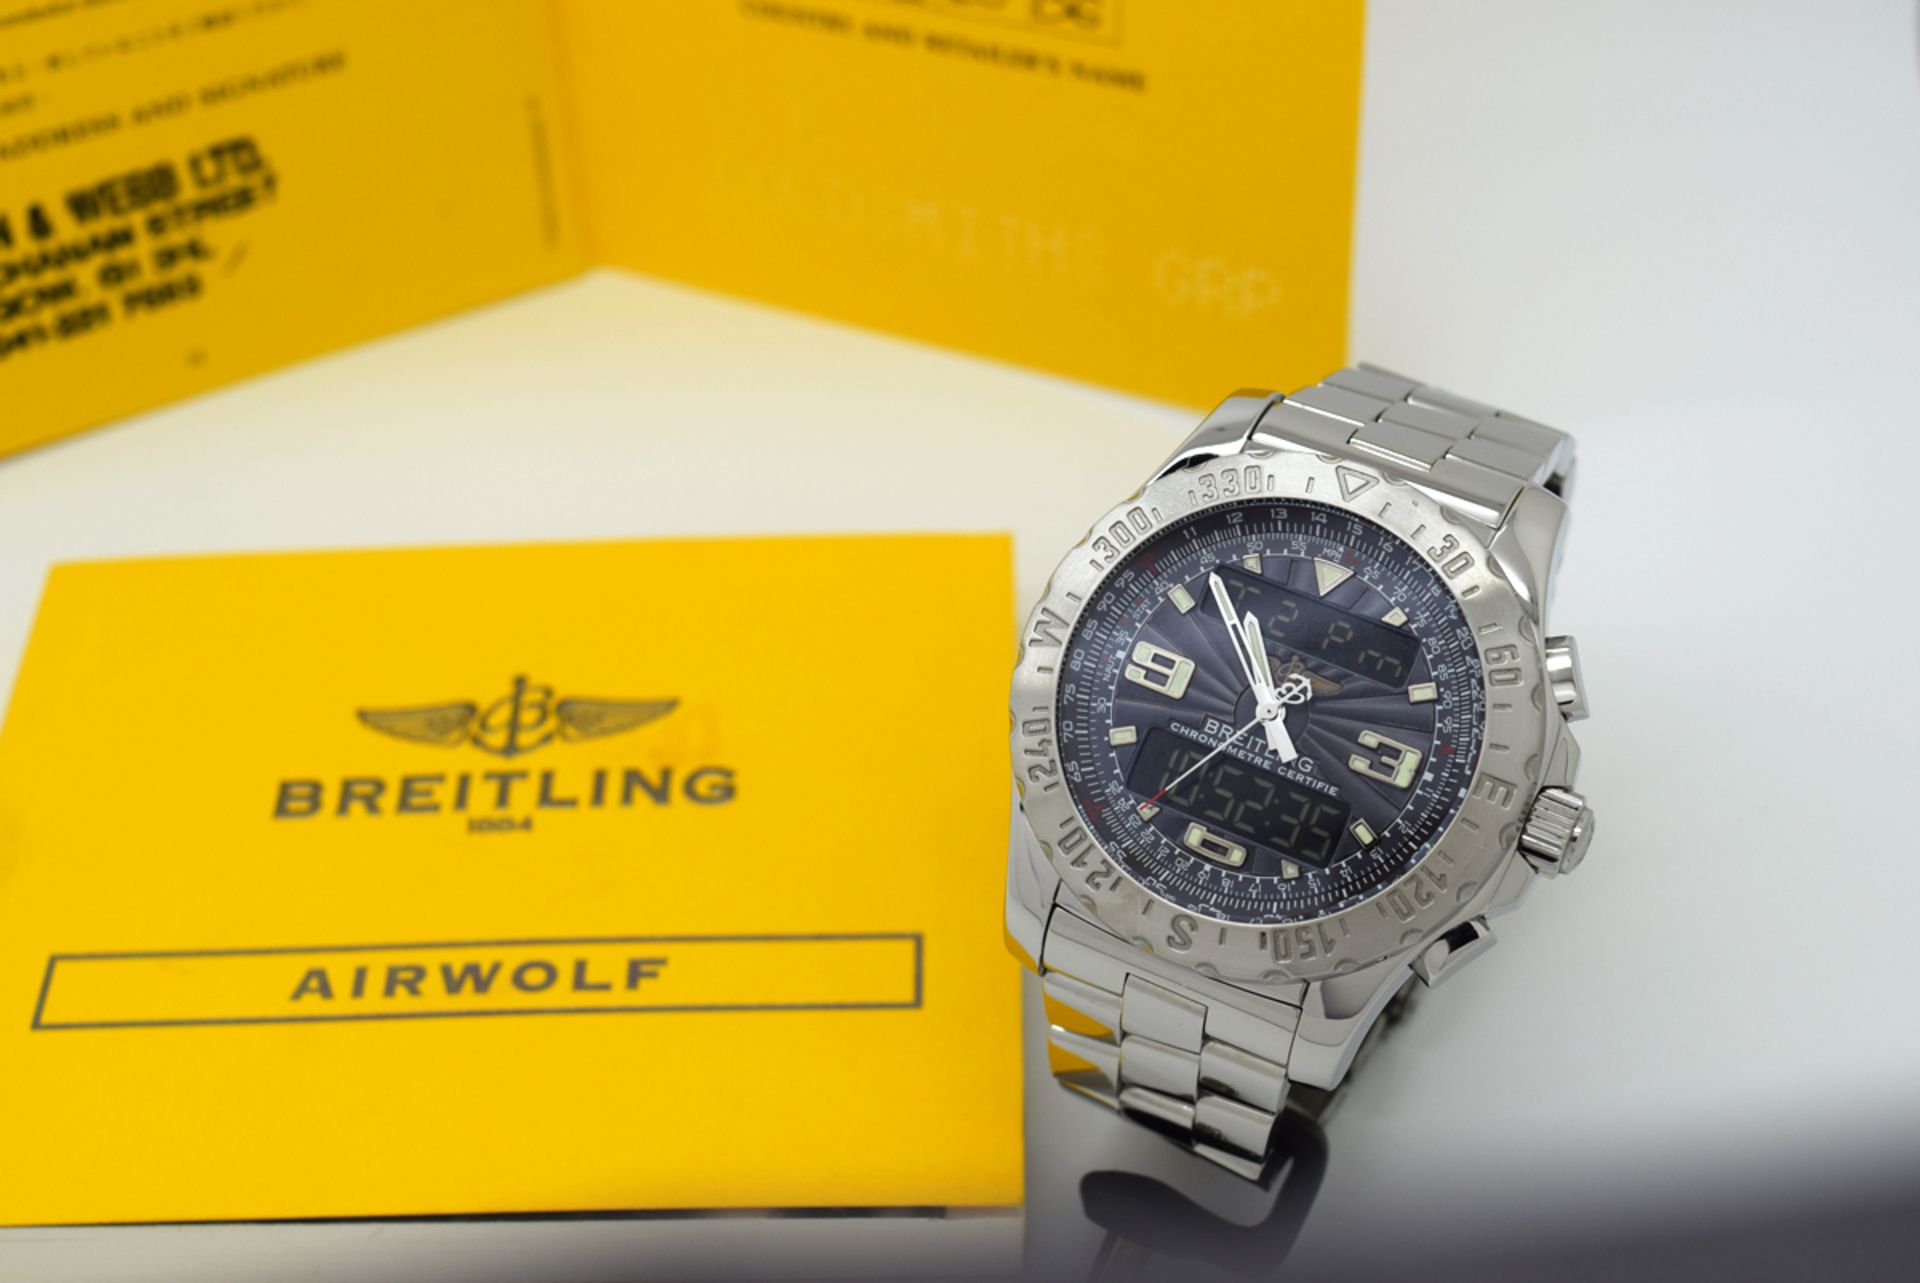 BREITLING AIRWOLF 'PROFESSIONAL' (A78363) - BLUE DIAL - Image 2 of 9